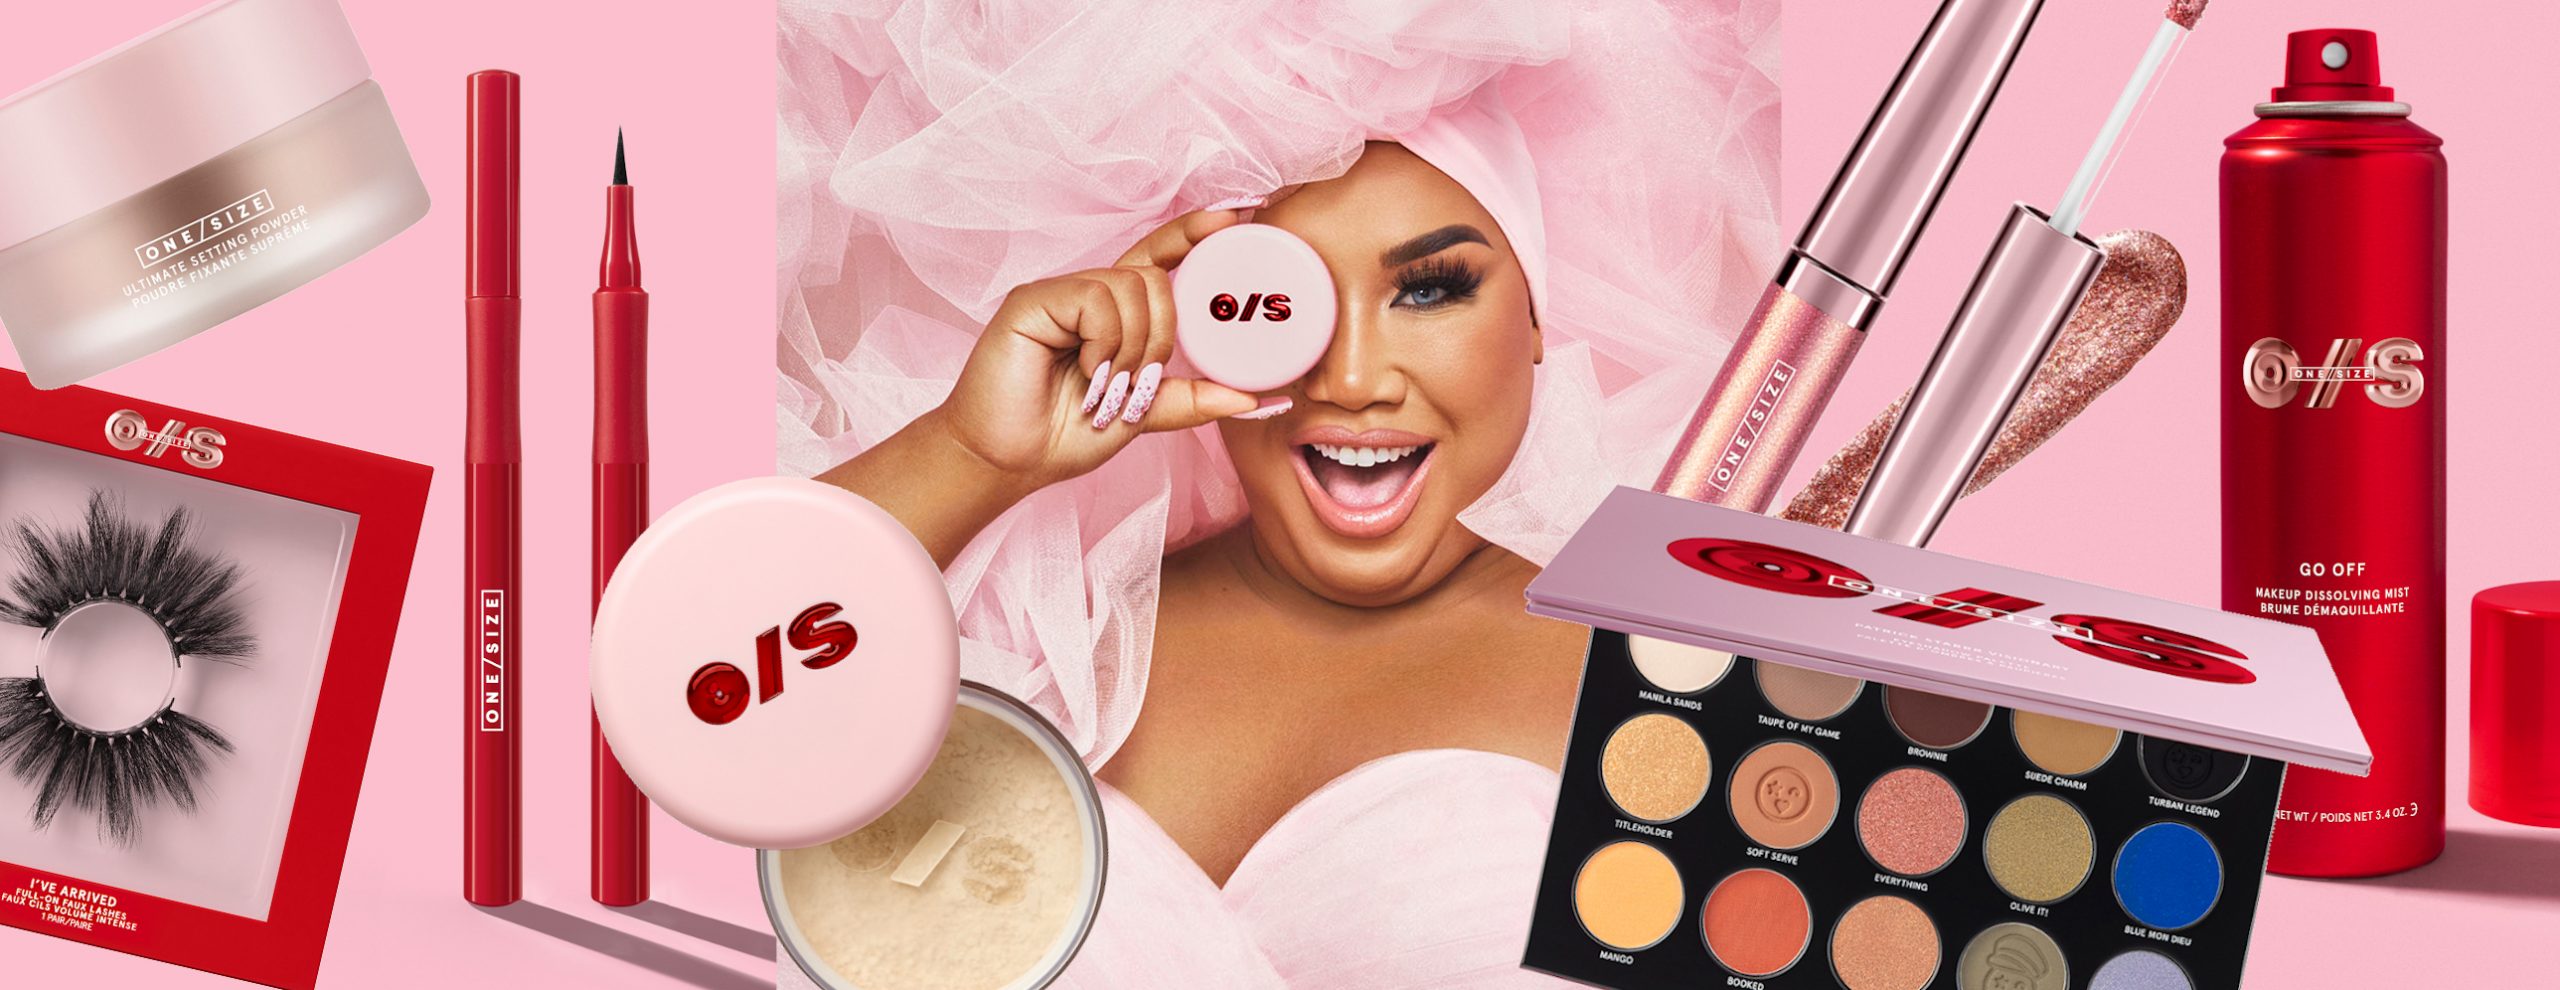 ONE/SIZE, By Beauty Guru And r Patrick Starrr, Is Here In Sephora